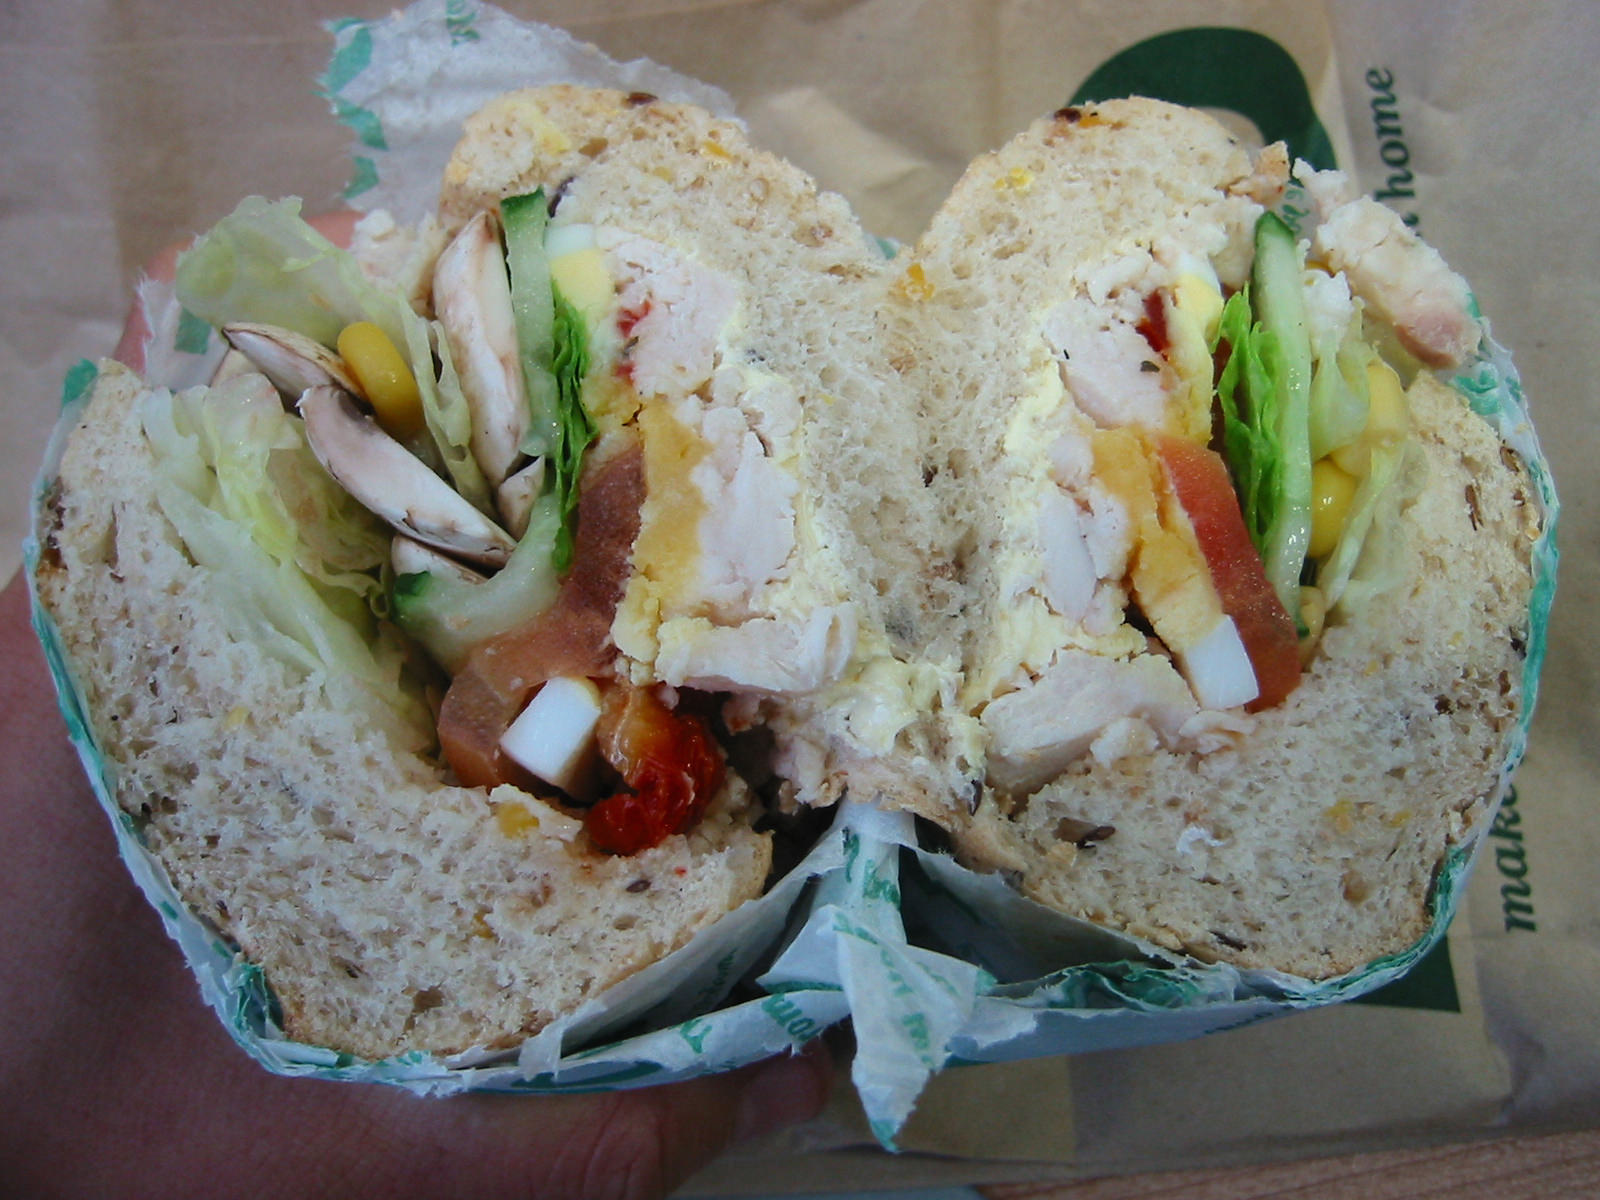 Multigrain roll with chicken, egg and salad